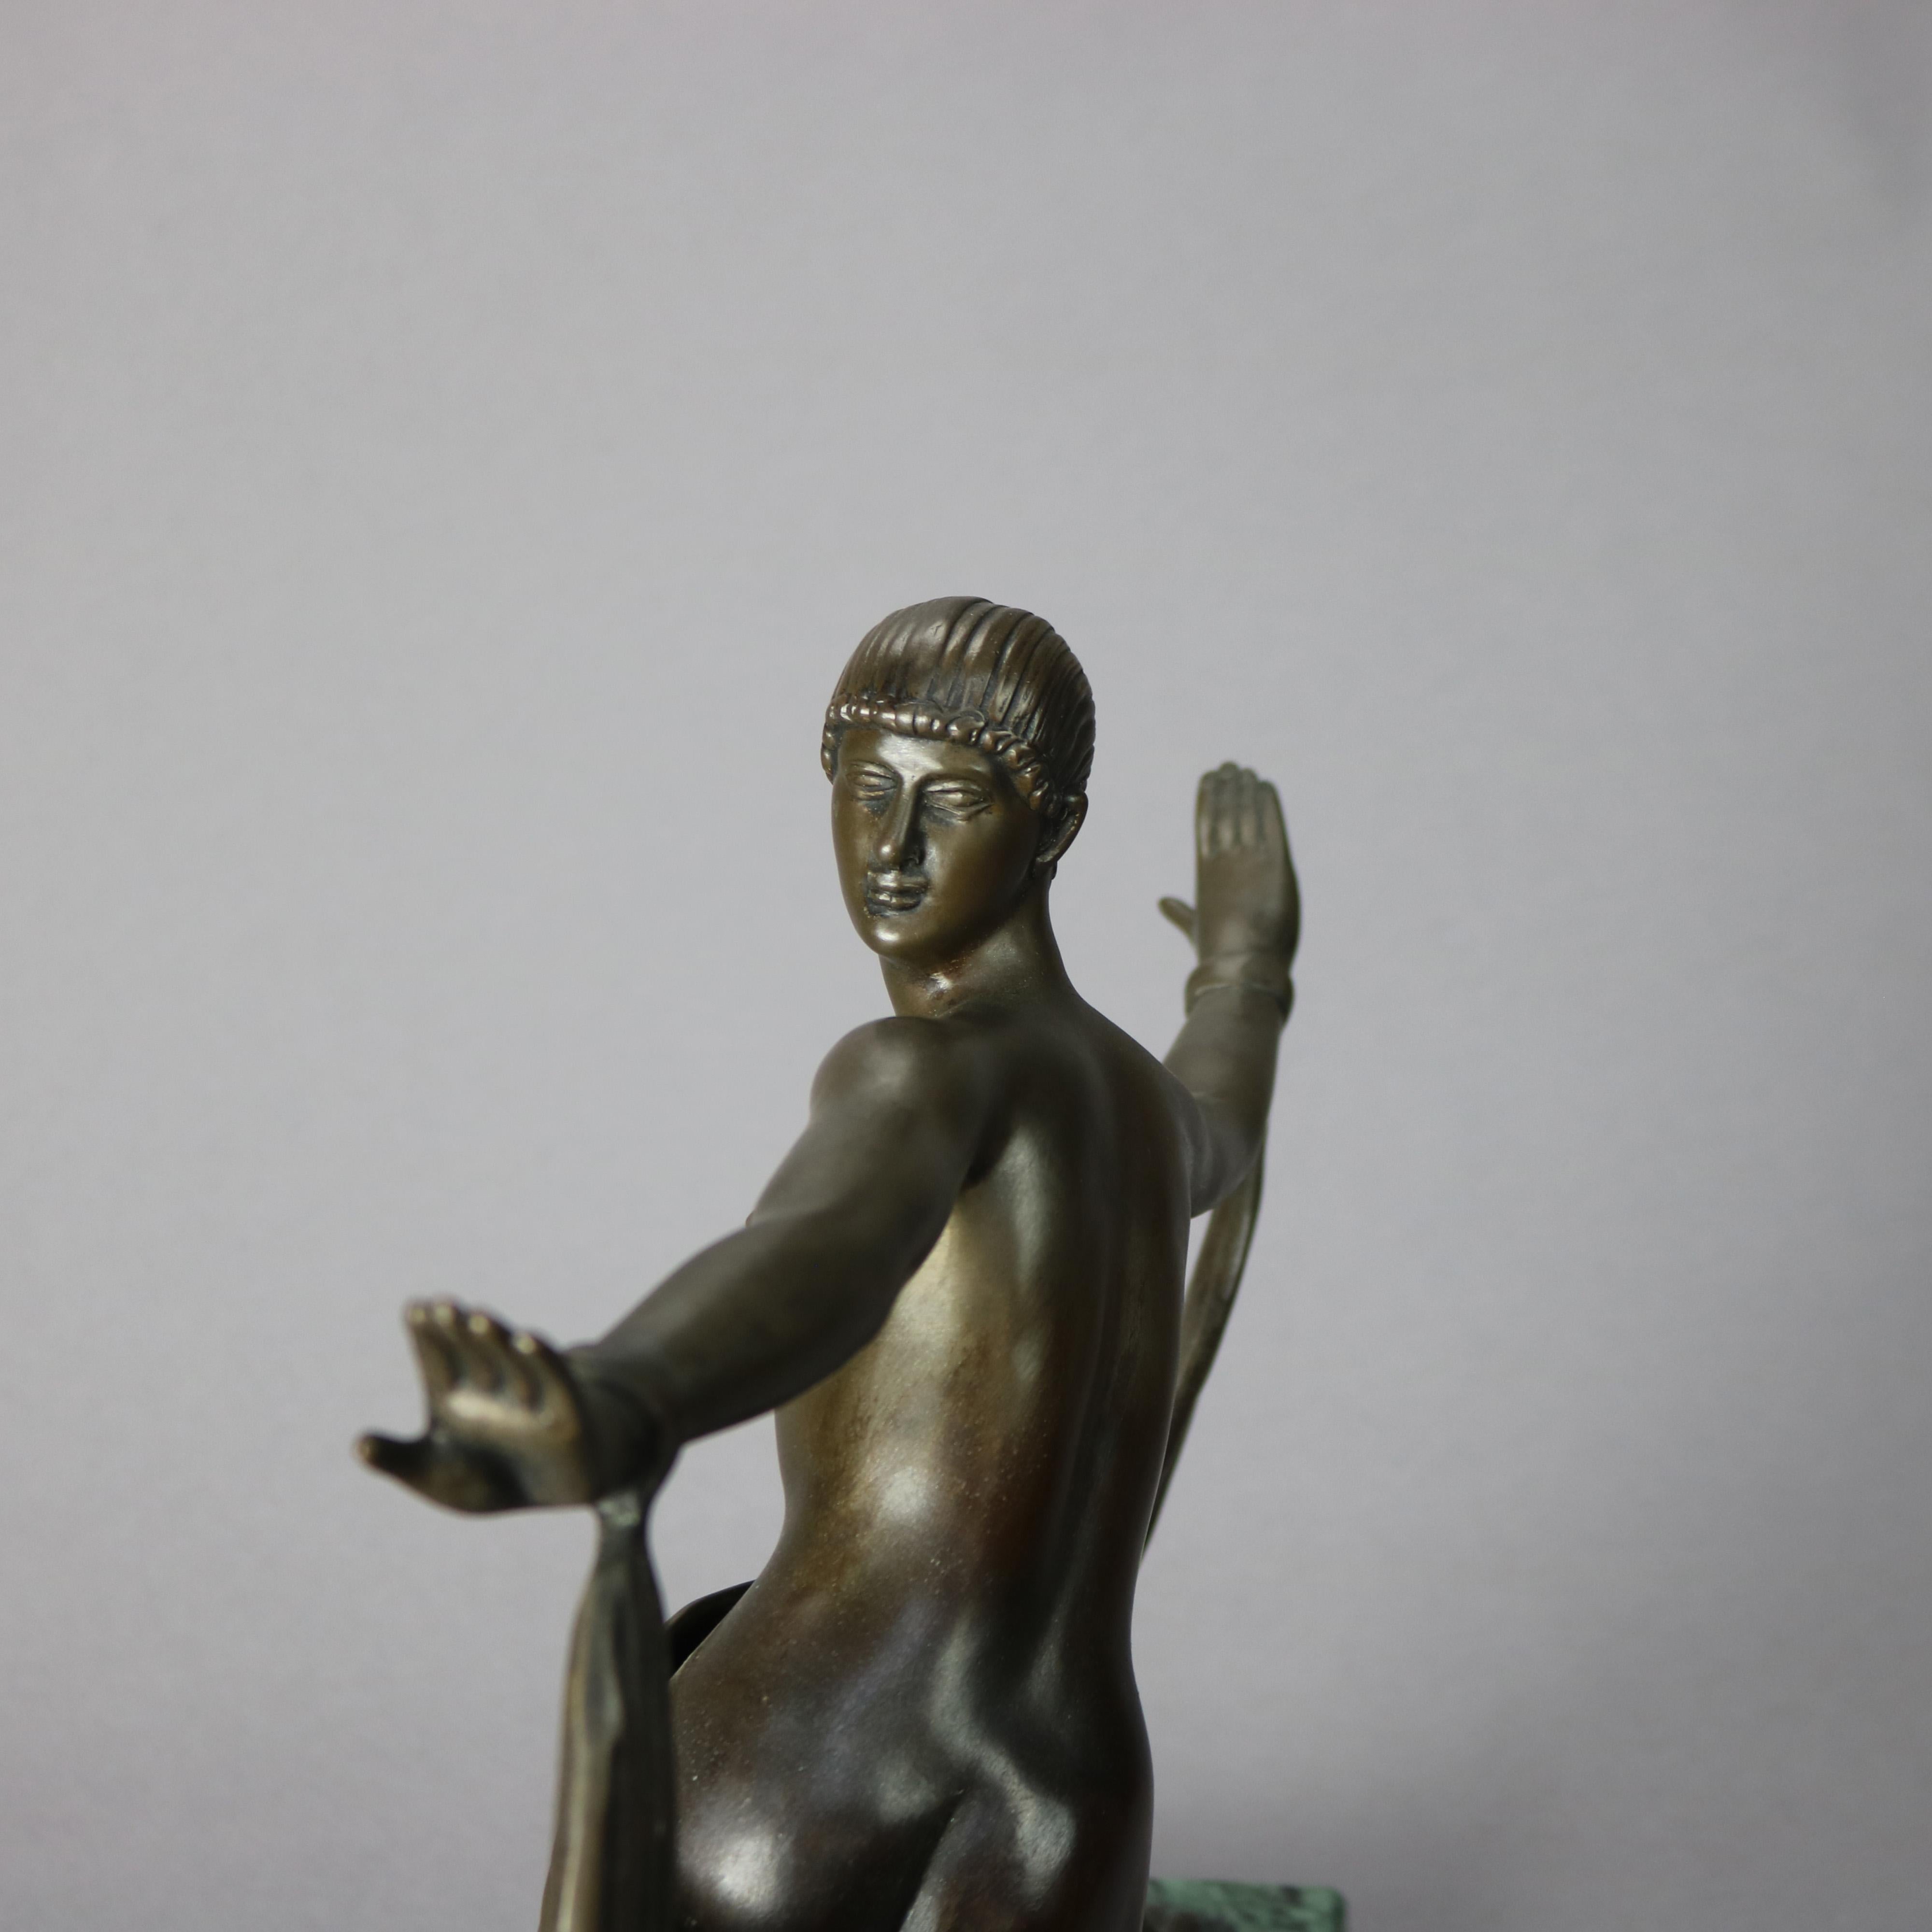 Antique French Art Deco Sculpture Statue of a Woman On Marble Plinth, 20th C. For Sale 6